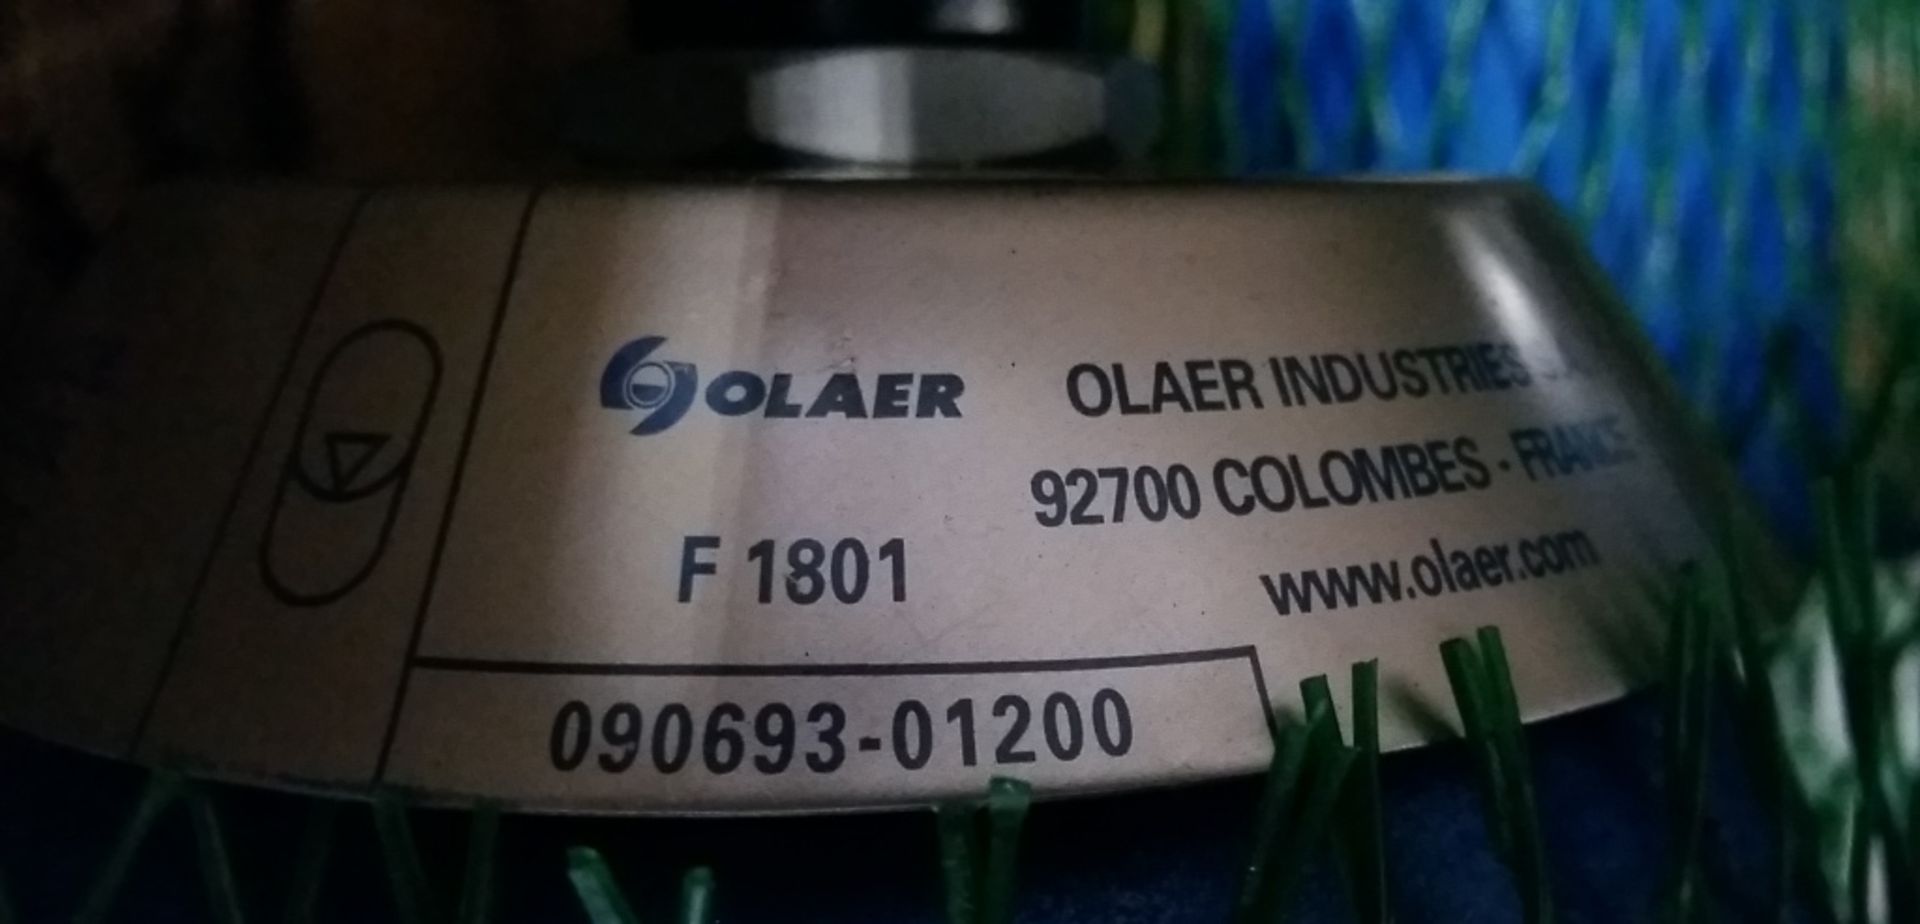 Solaer F1901 pressure vessels x12 - Image 2 of 11